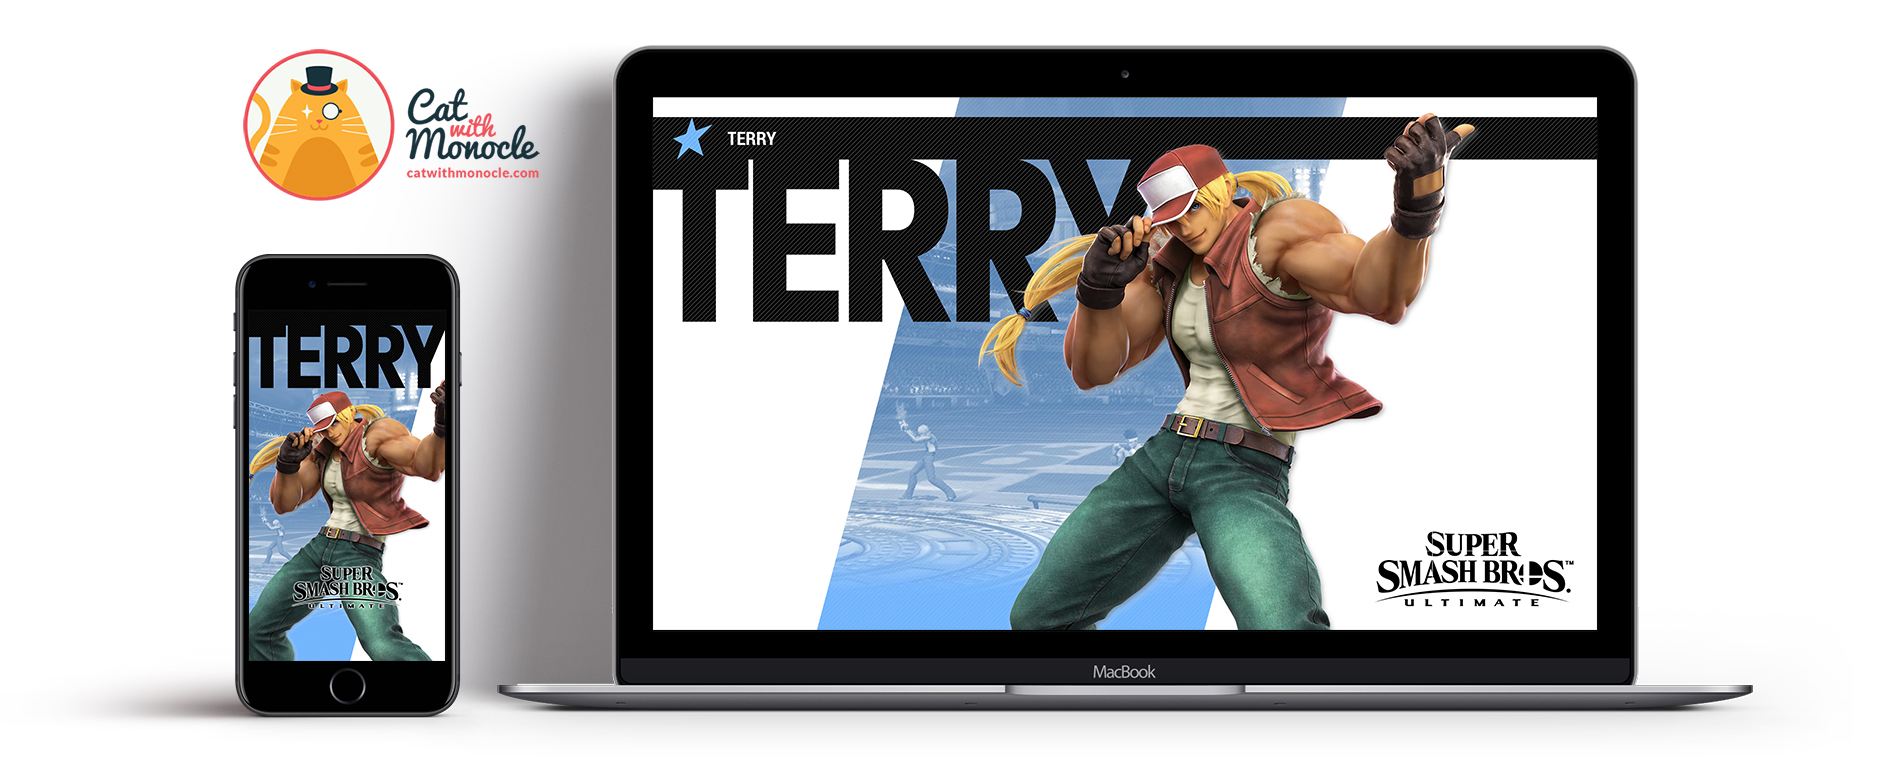 Super Smash Bros Ultimate Terry Wallpapers Costume 3